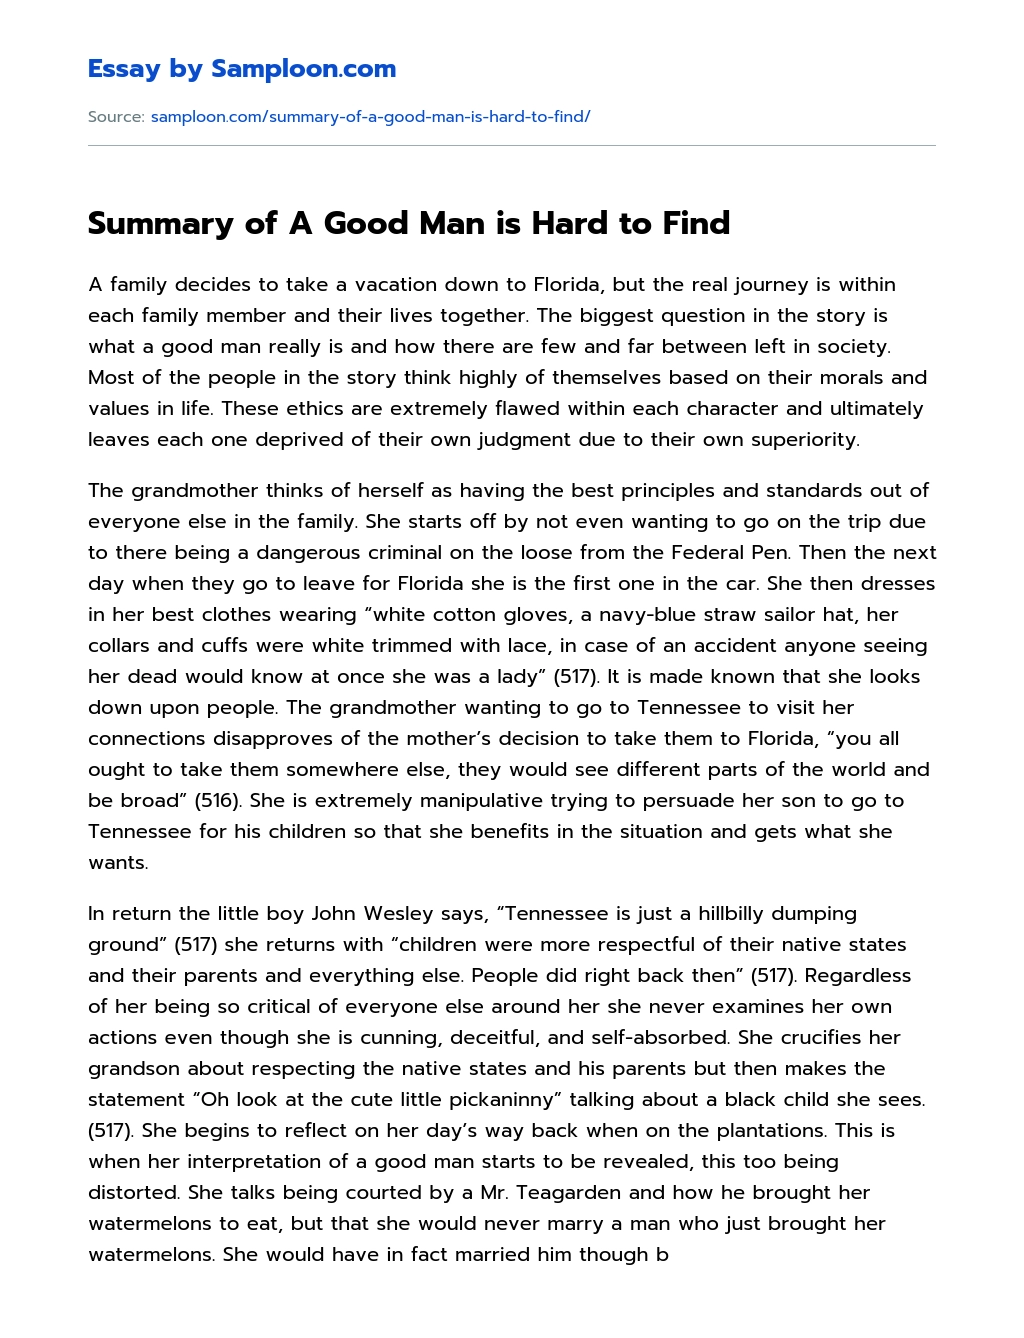 Summary of A Good Man is Hard to Find essay